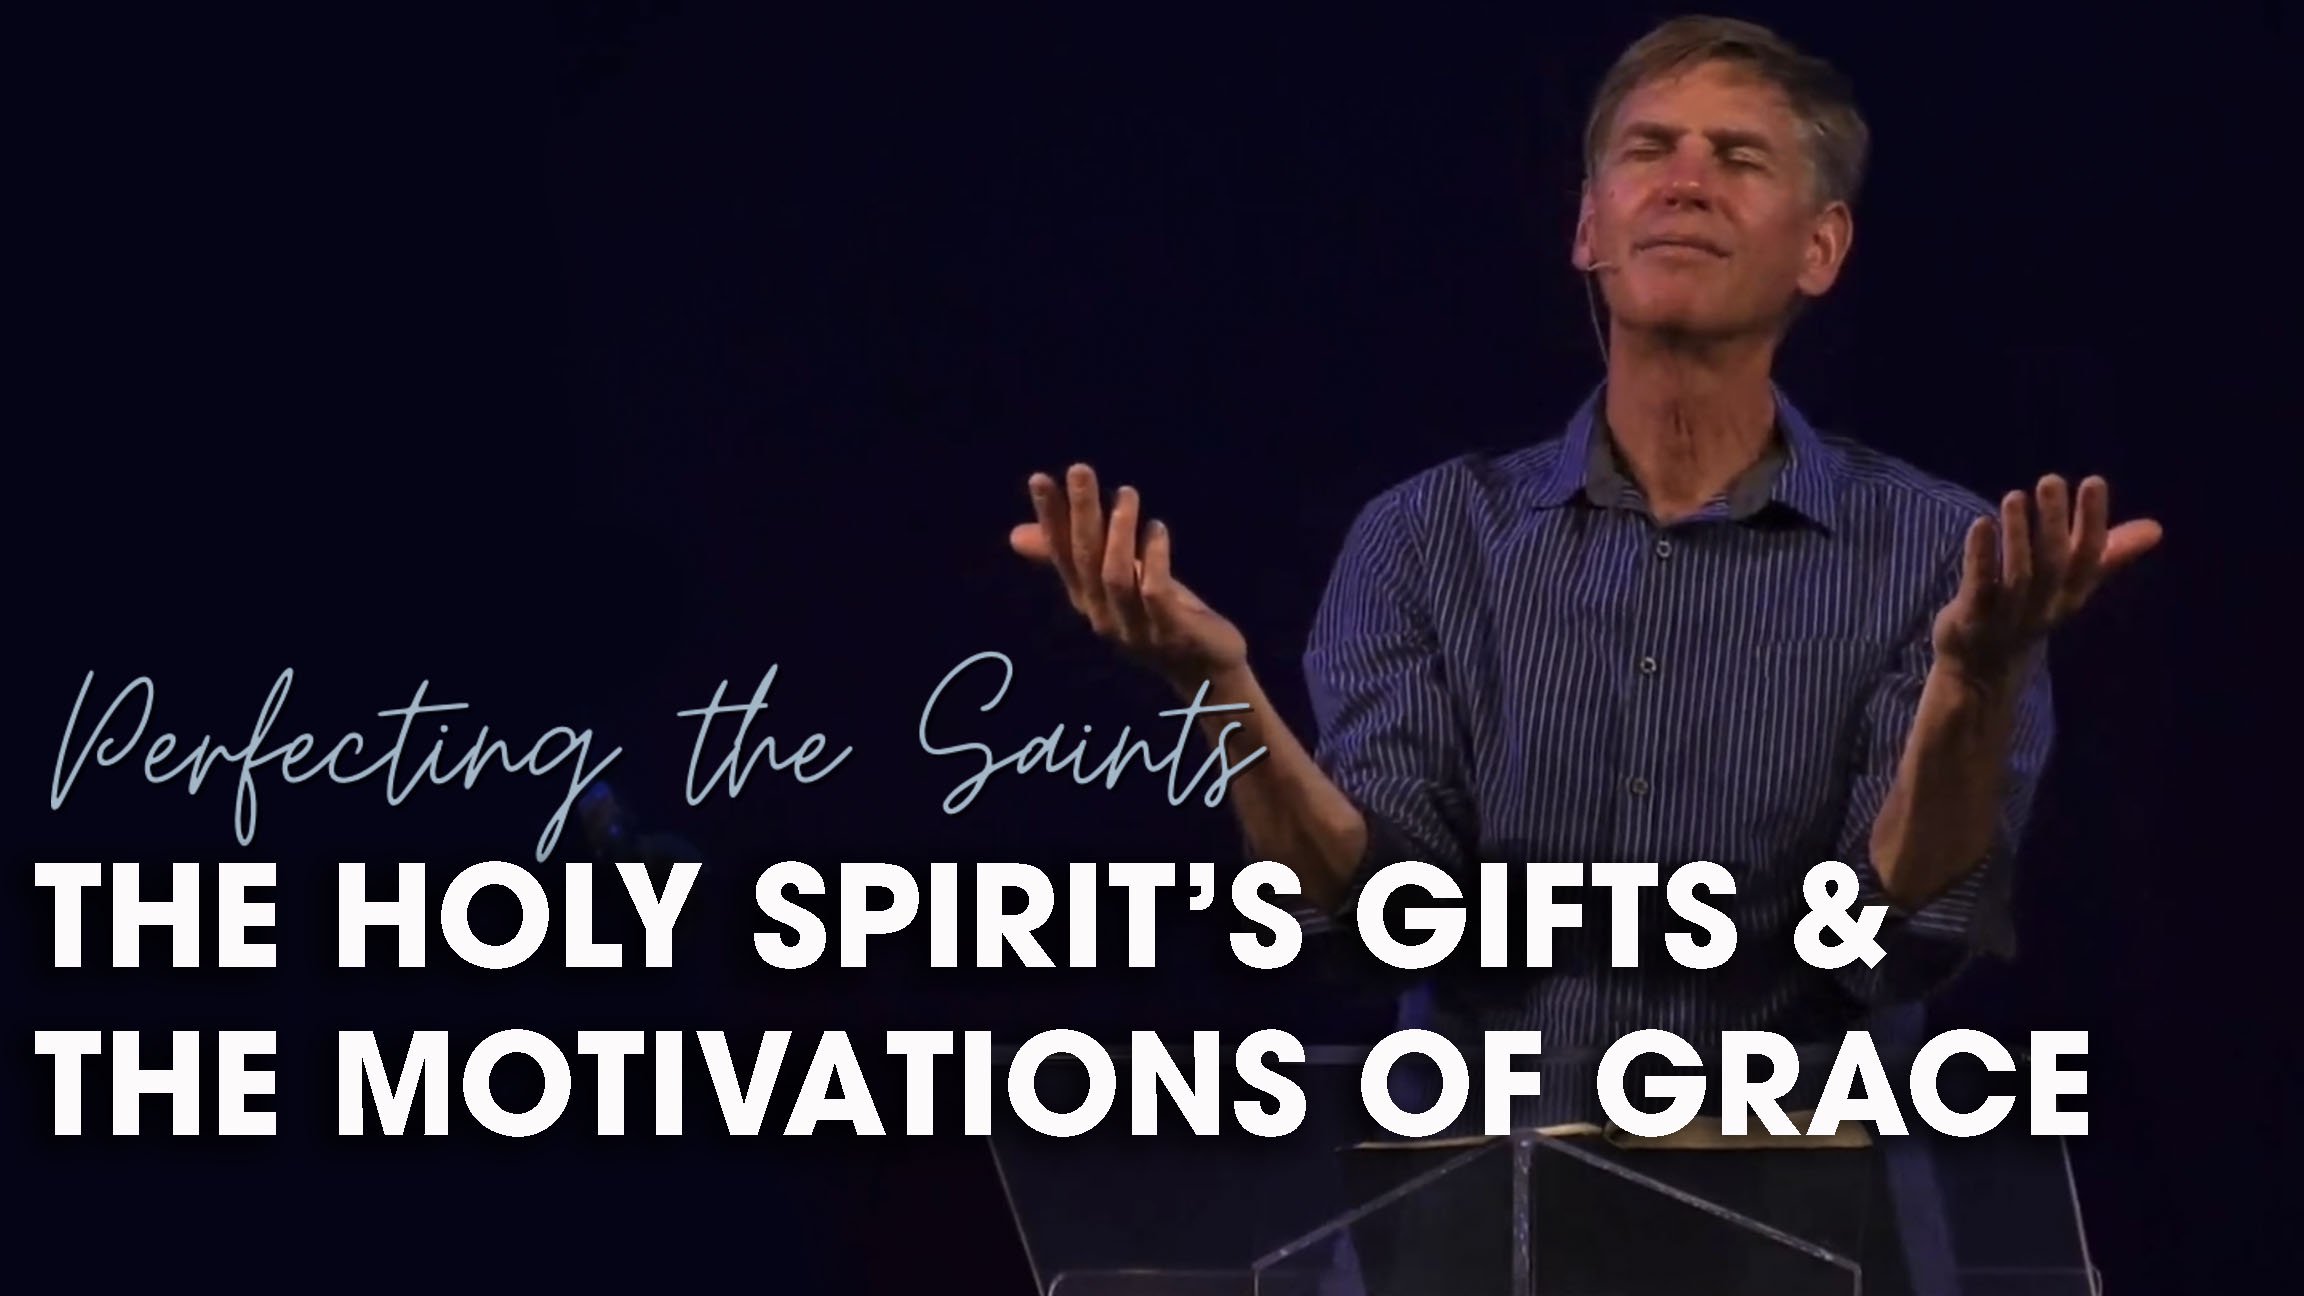 The Holy Spirit’s Gifts, and the Motivations of Grace